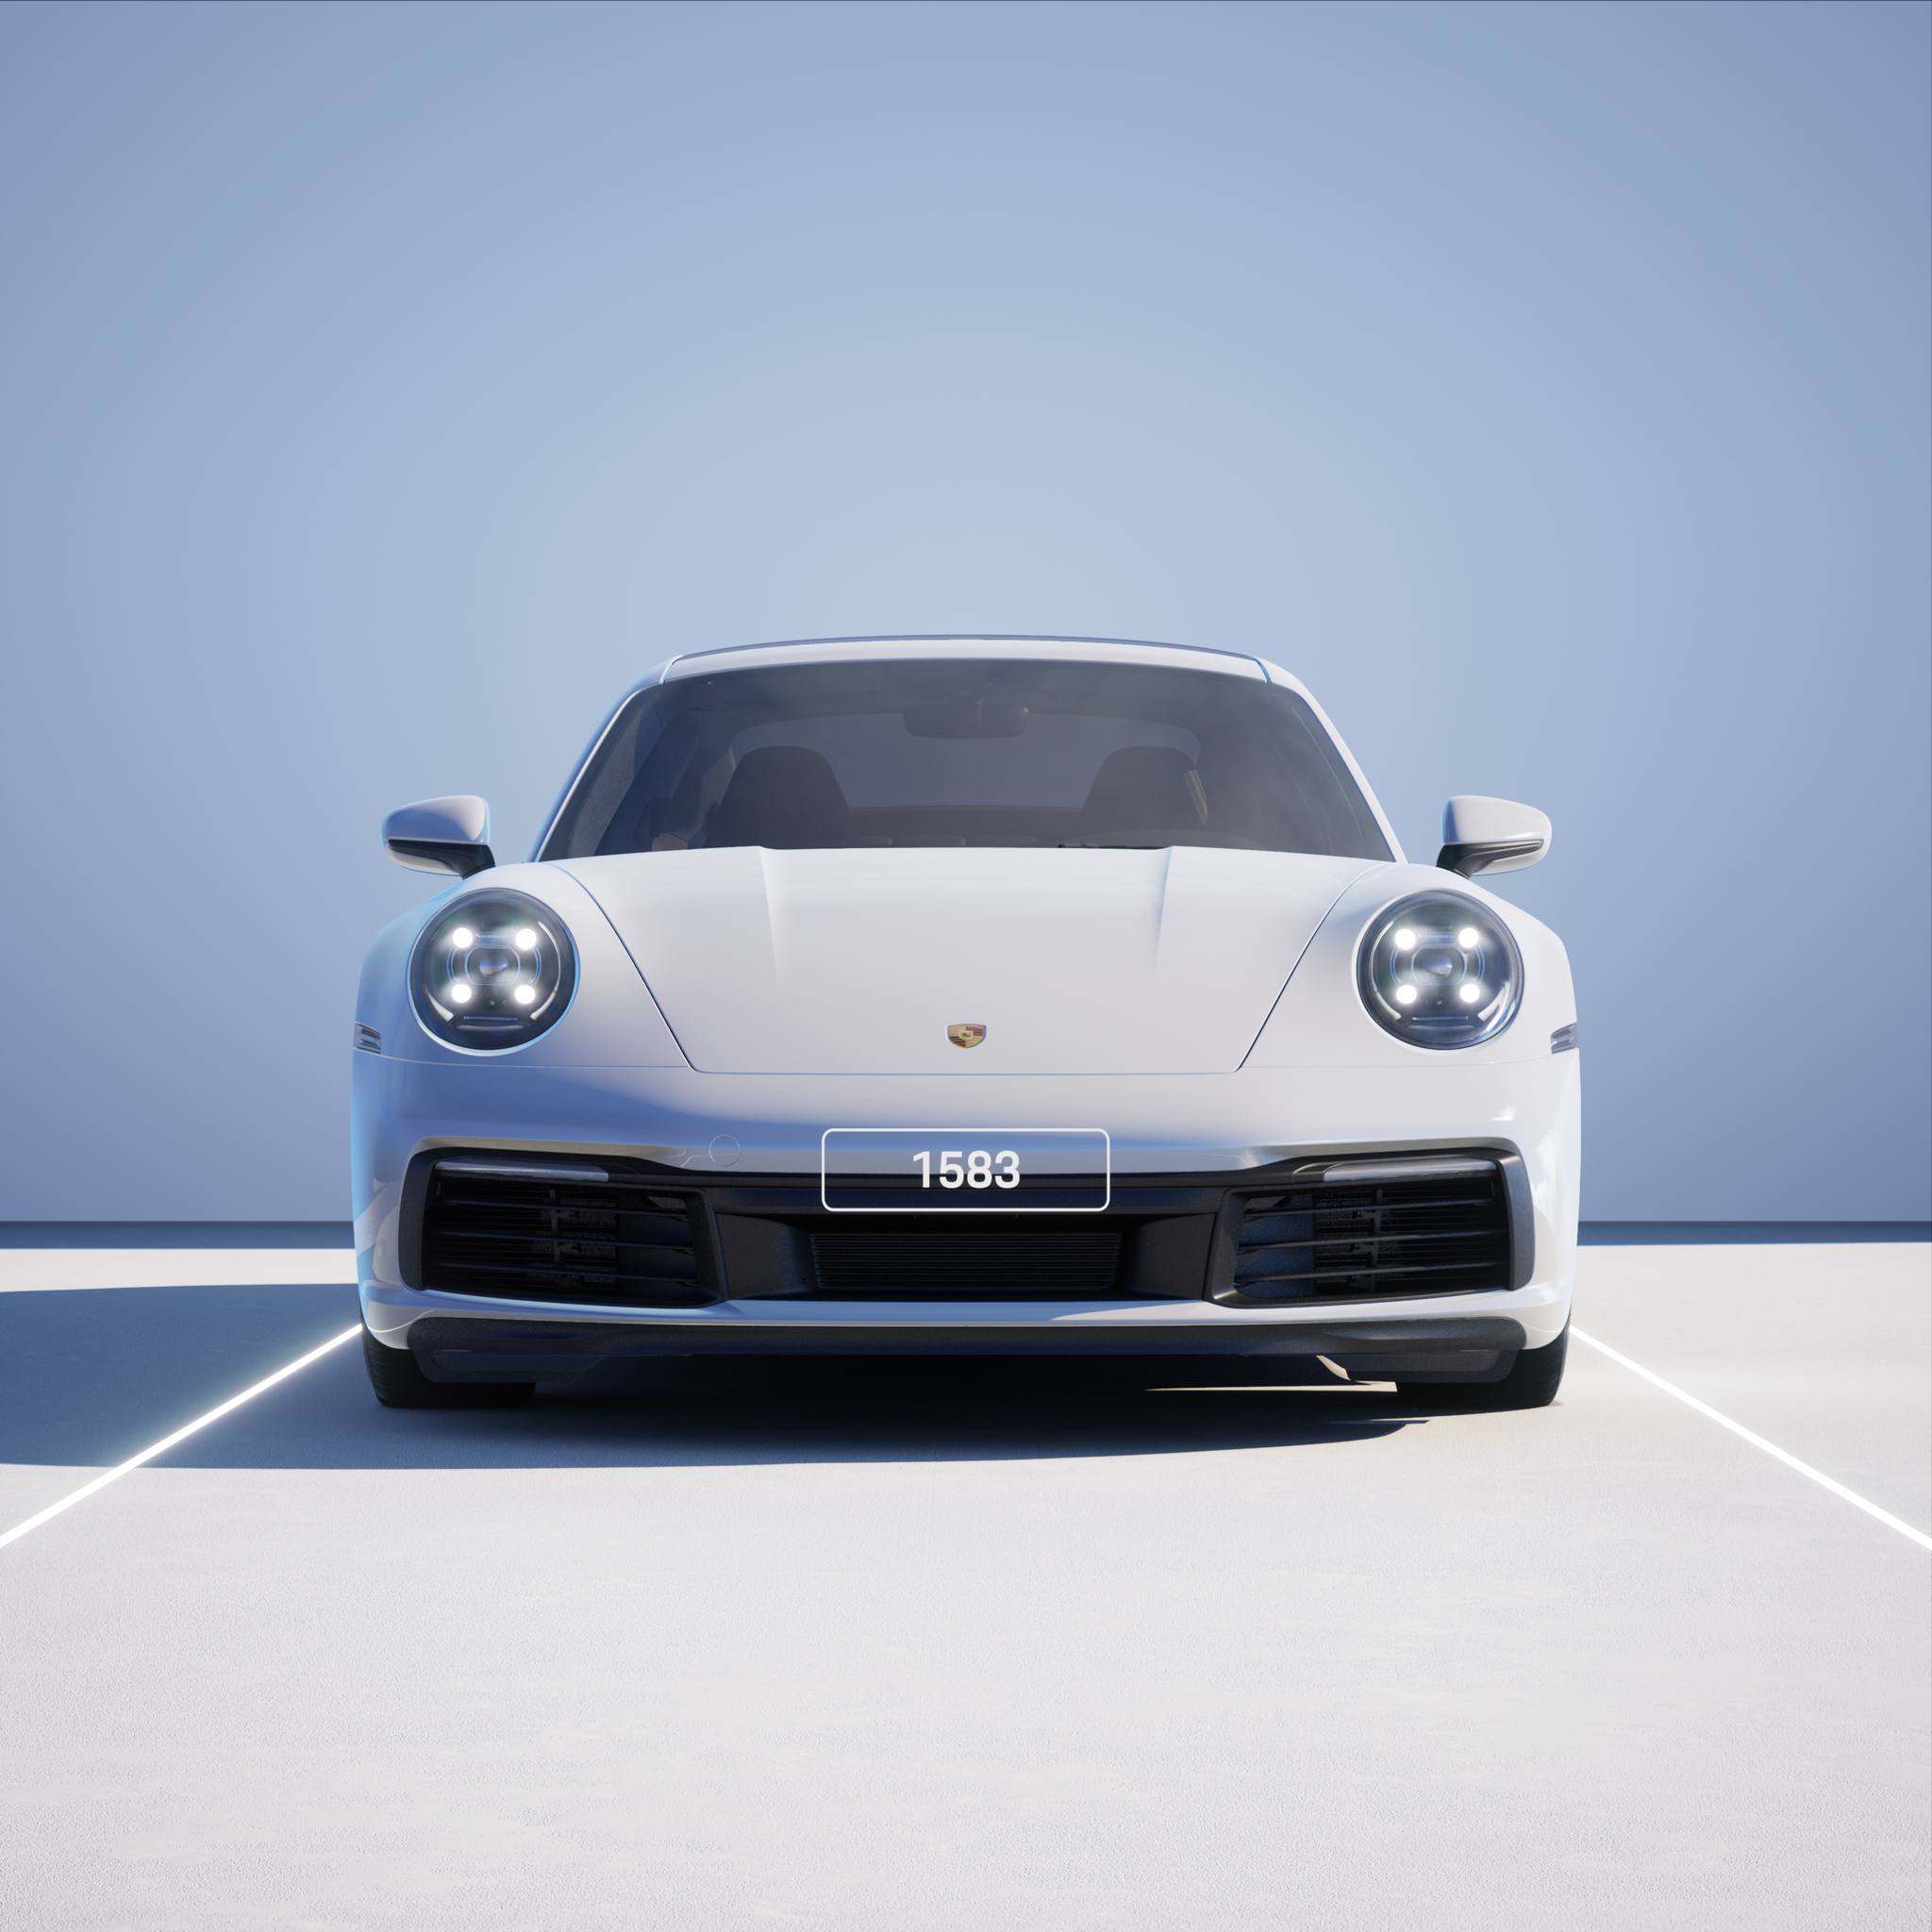 The PORSCHΞ 911 1583 image in phase